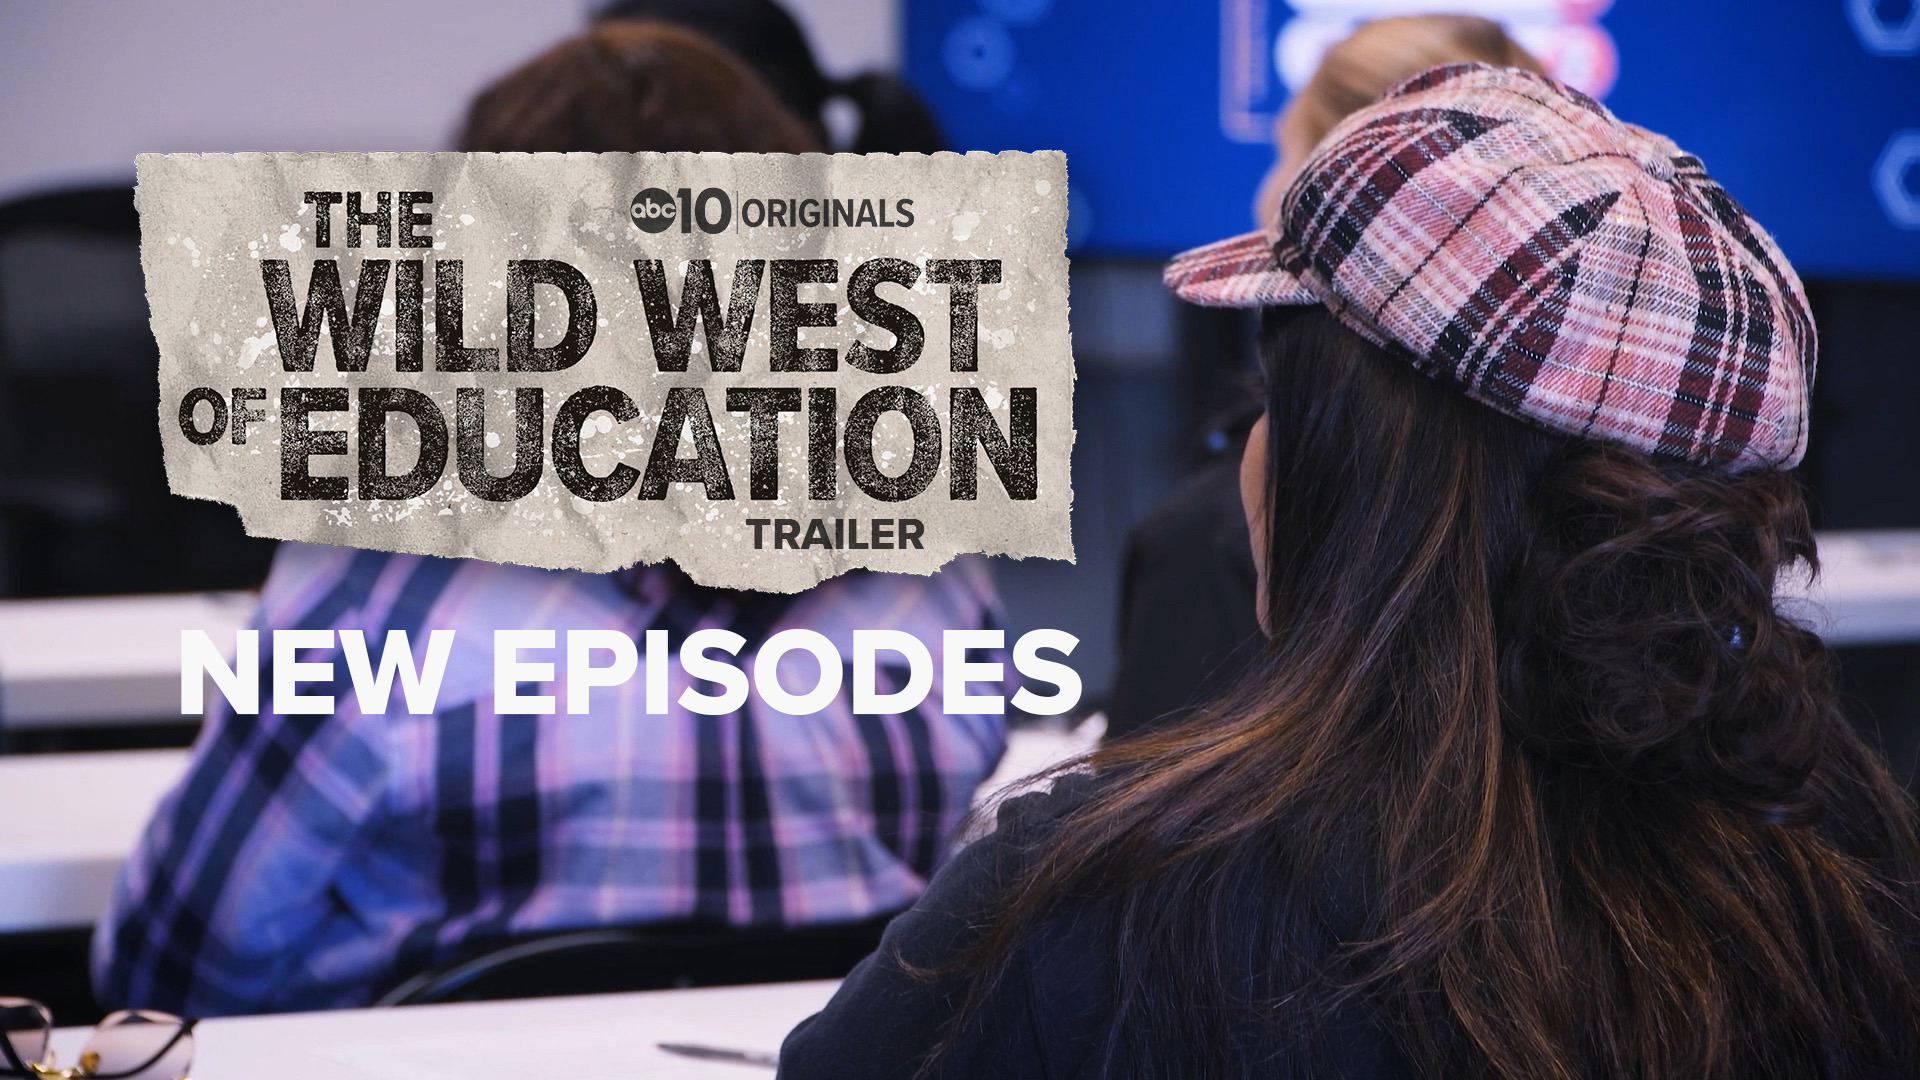 The ABC10 Originals investigation into the questionable practices at a local charter school continues on May 9th.